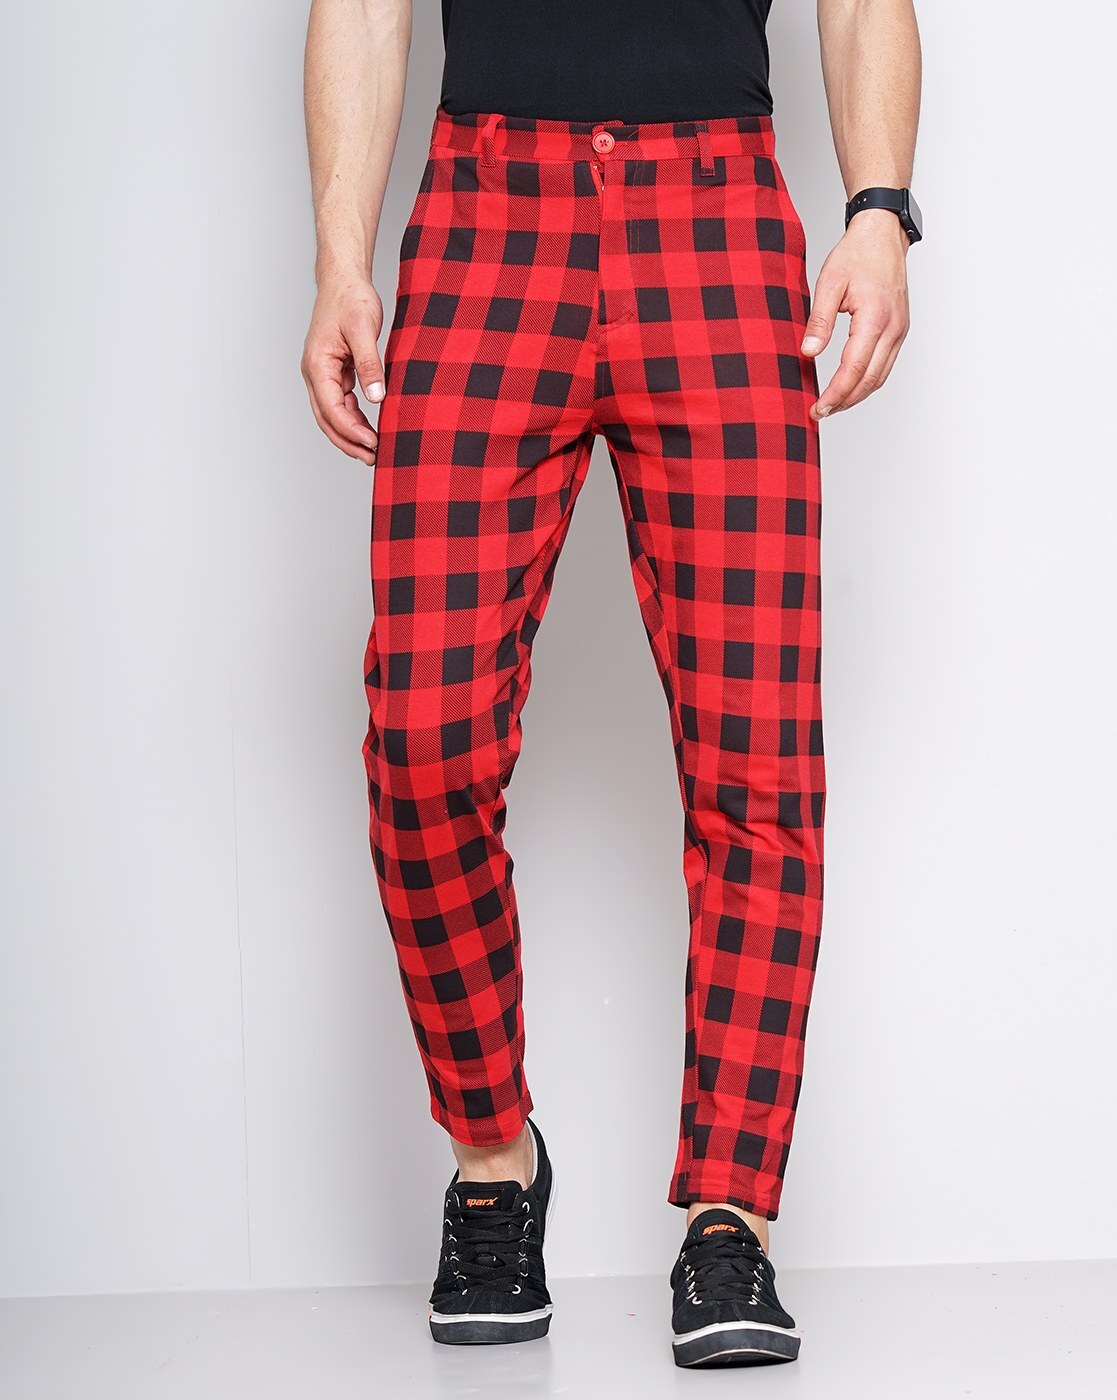 Buy Bombay Trooper Soft Flannel Checkered Cotton Pajama Pants Small  Checks 36 Christmas Red at Amazonin